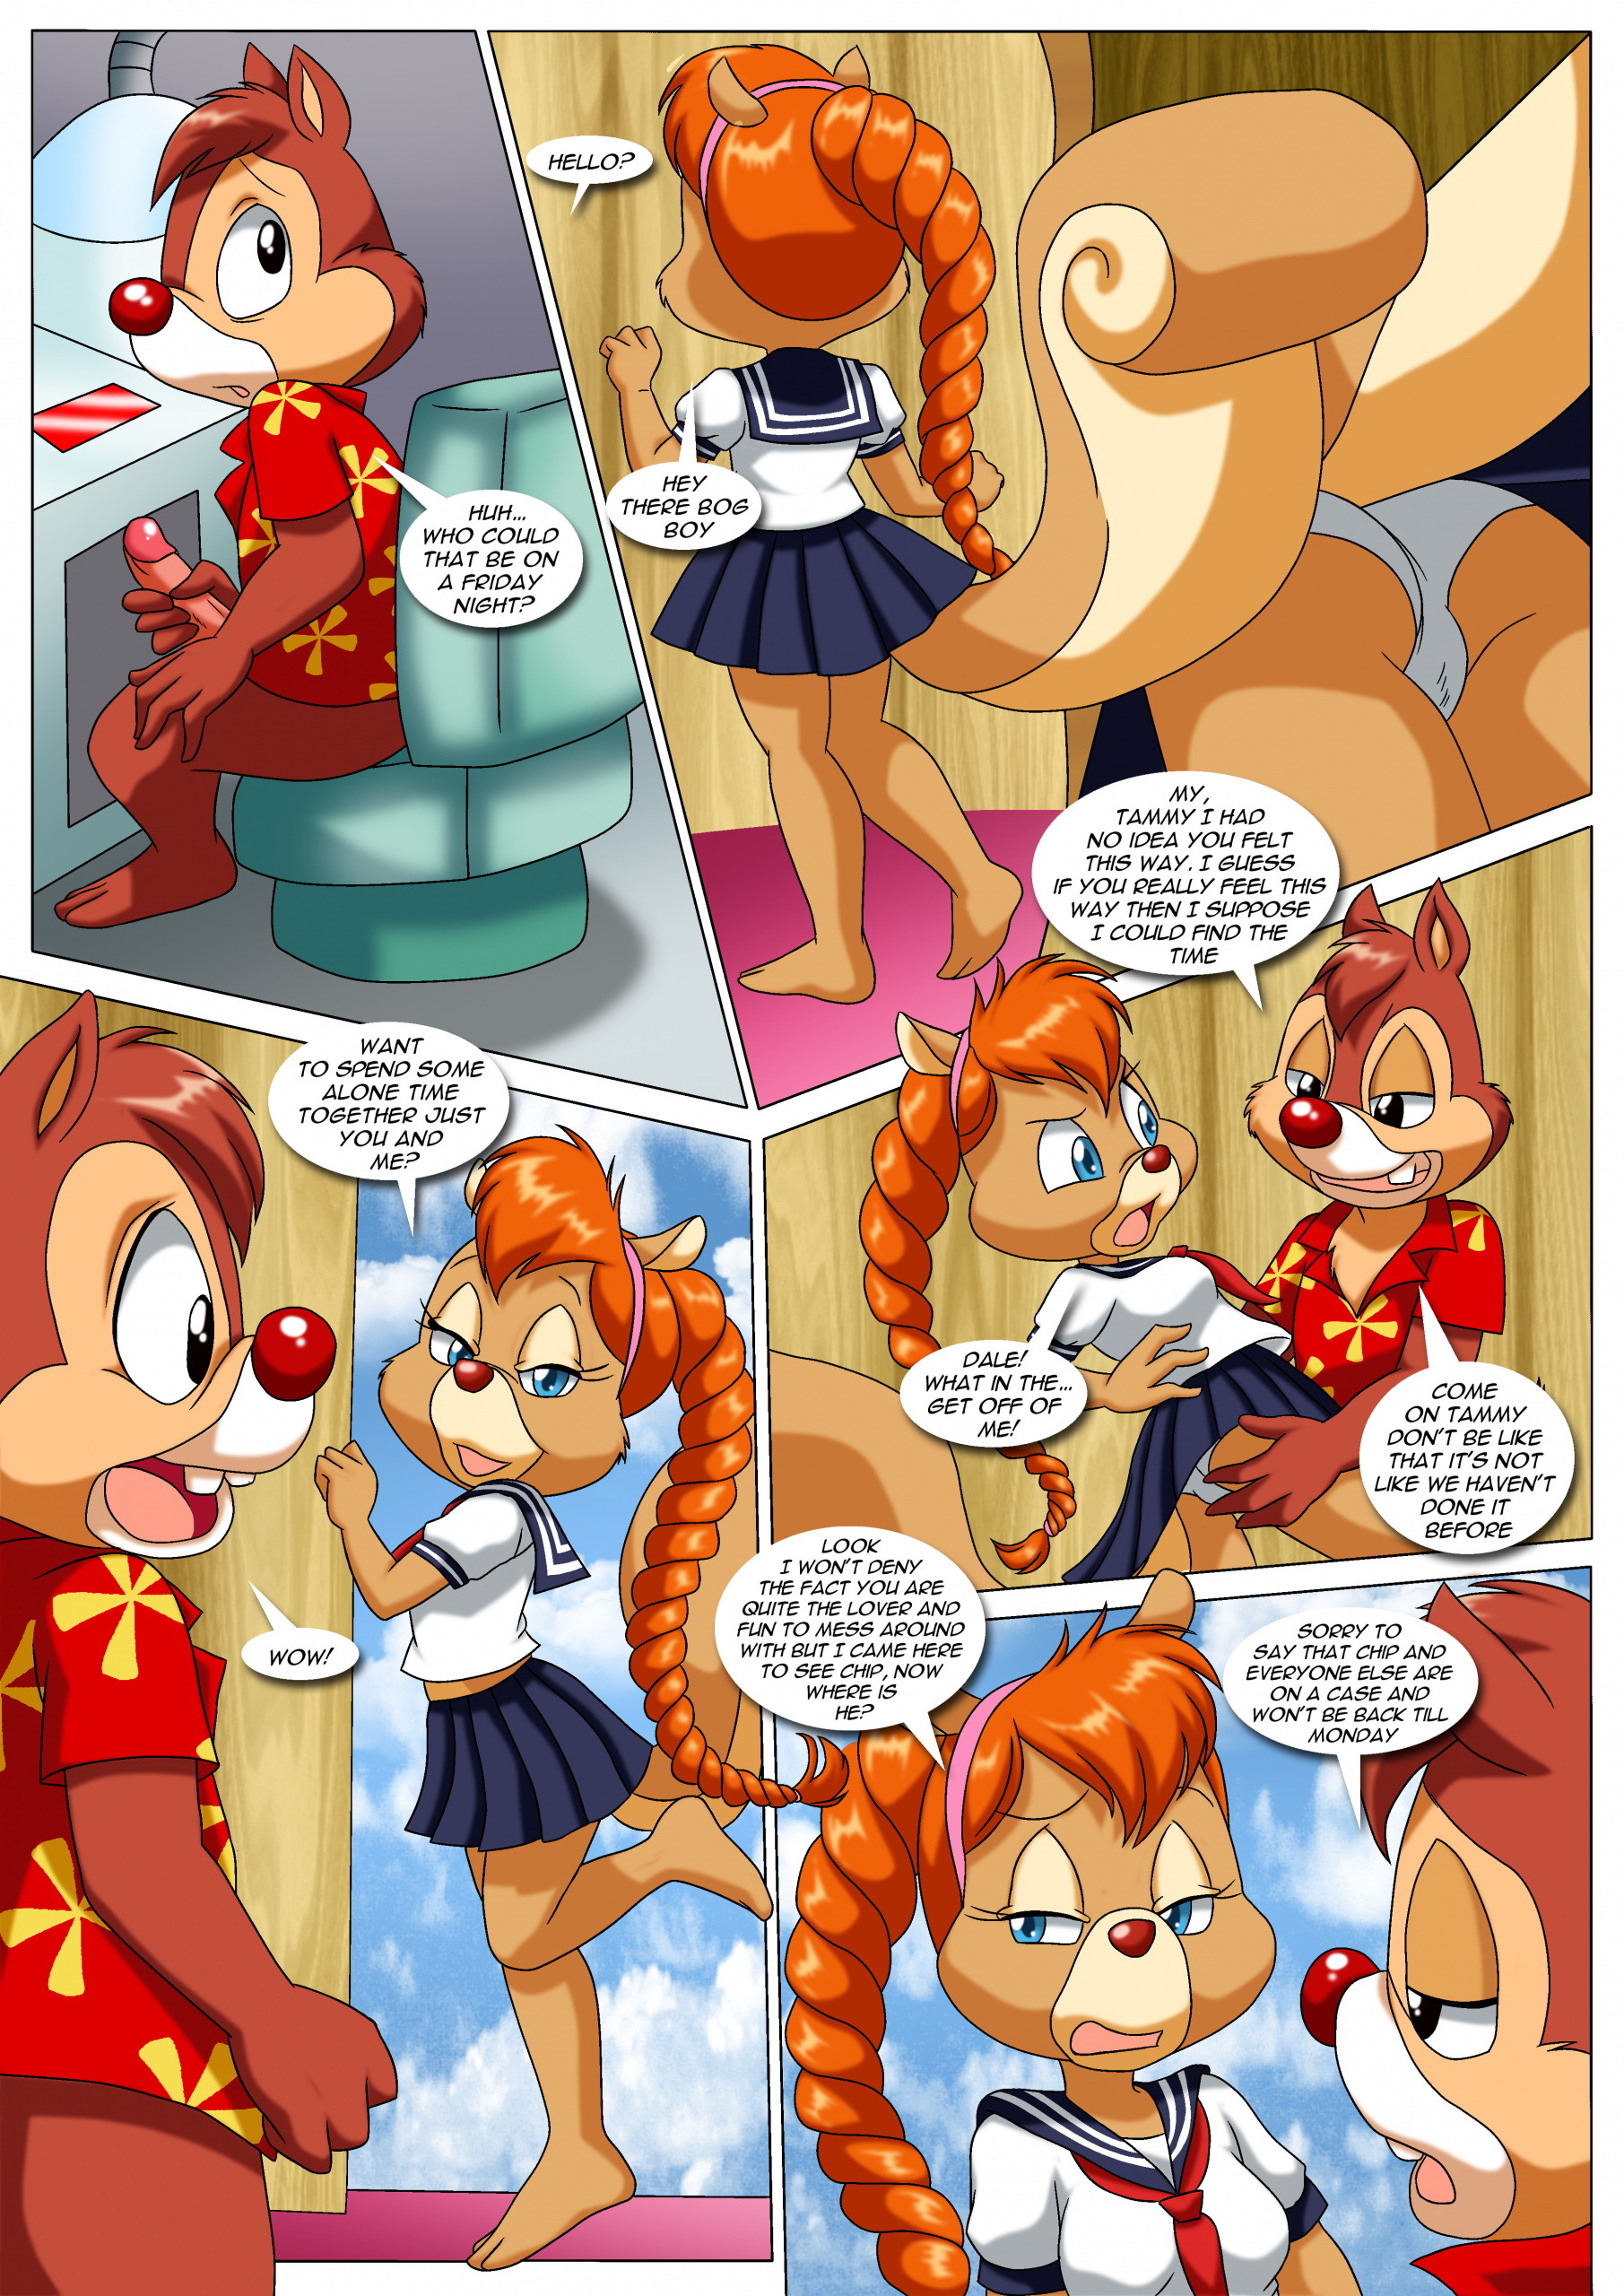 Rescue Rodents 6 - A Time for Love - Page 3